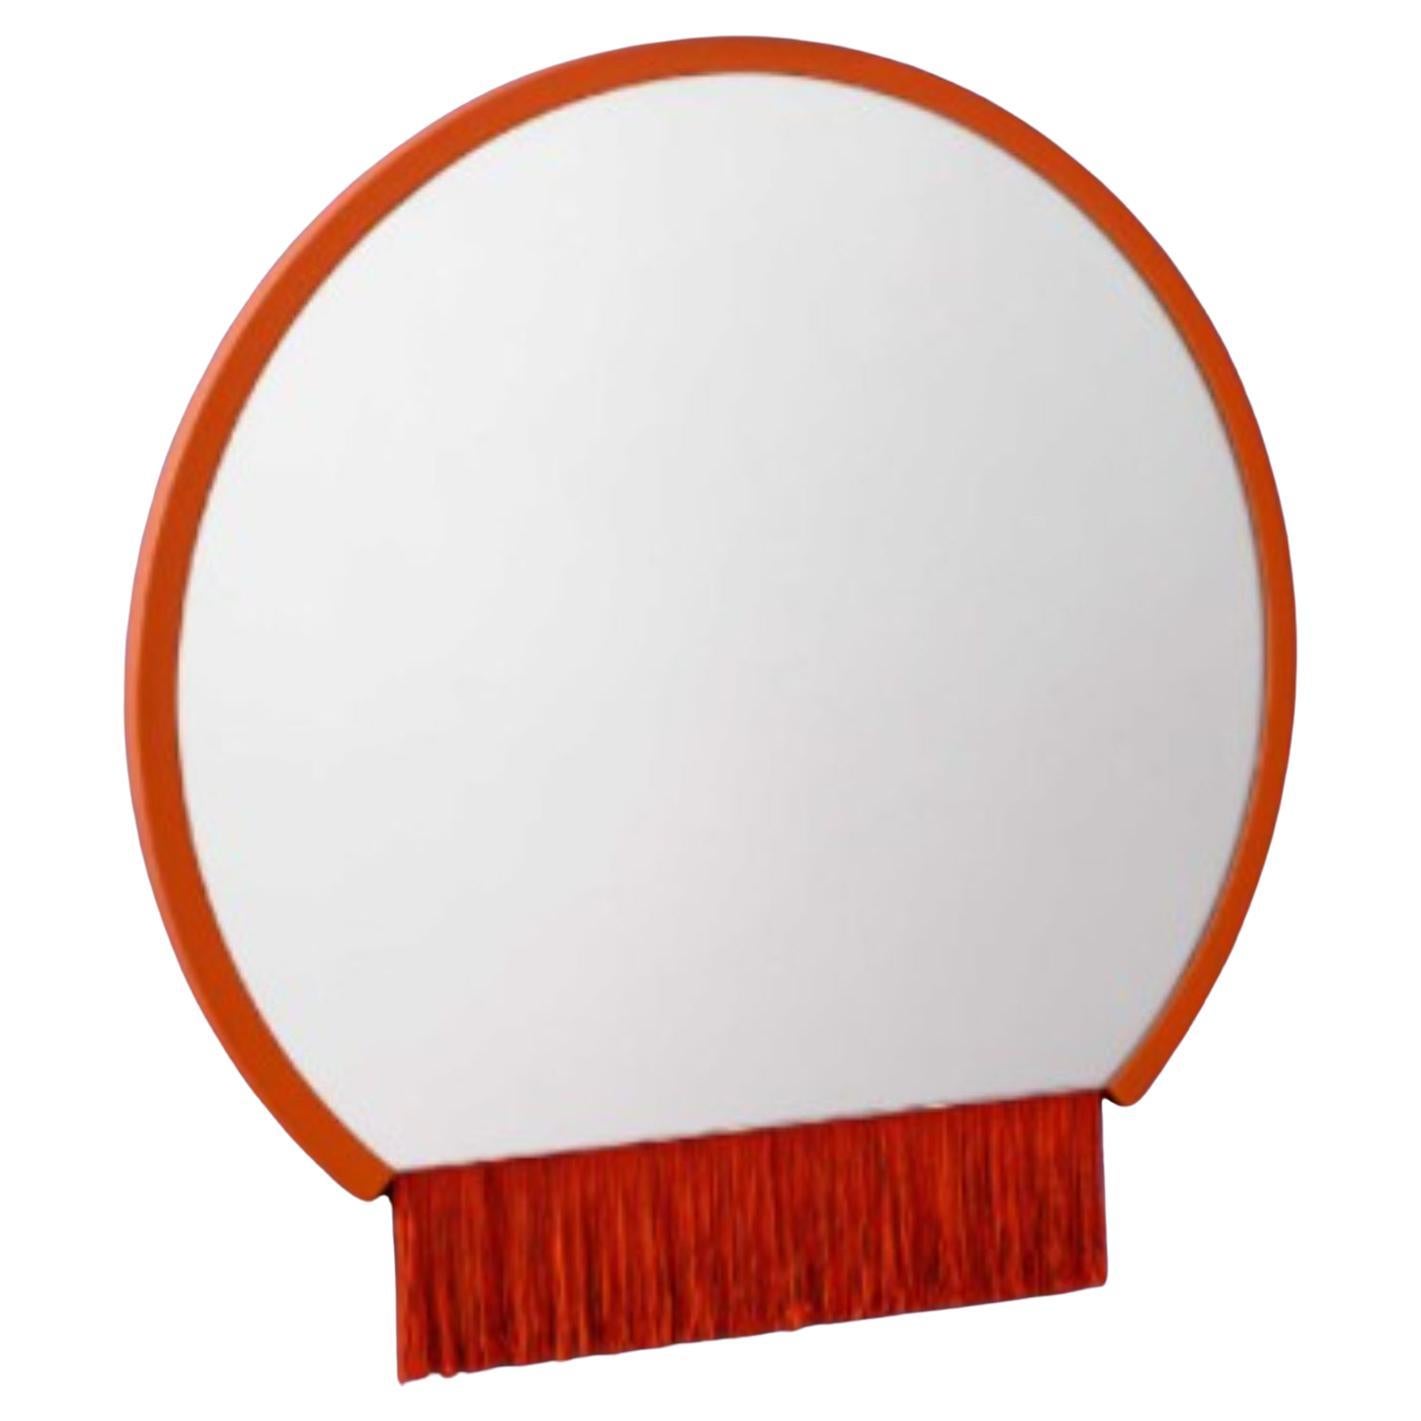 Boudoir Large Wall Mirror by Tero Kuitunen For Sale